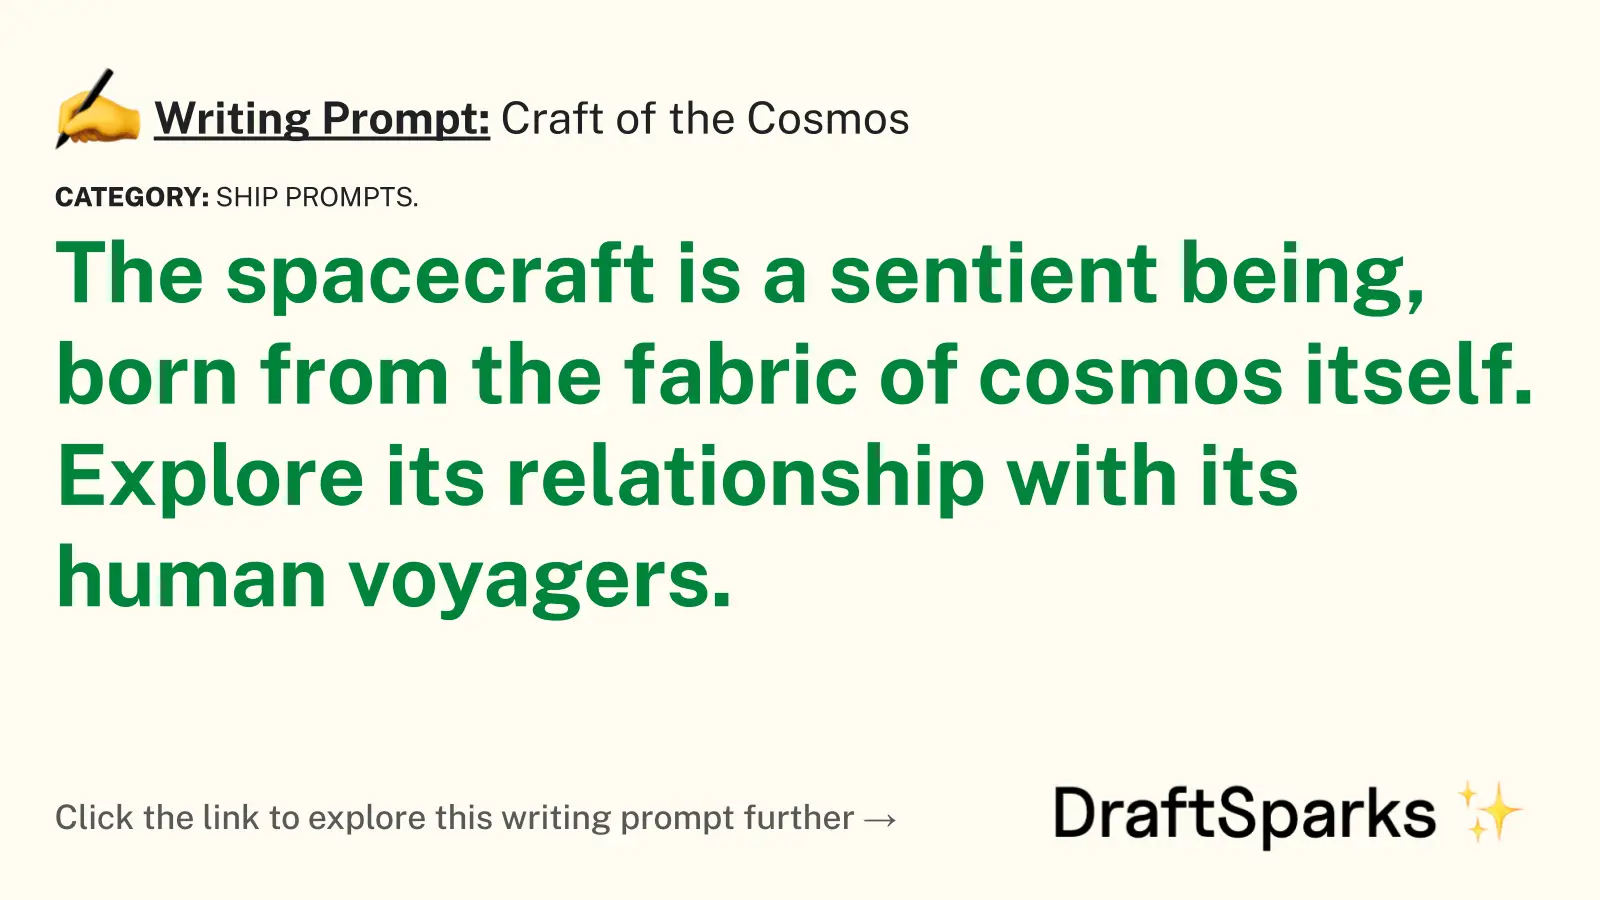 Craft of the Cosmos